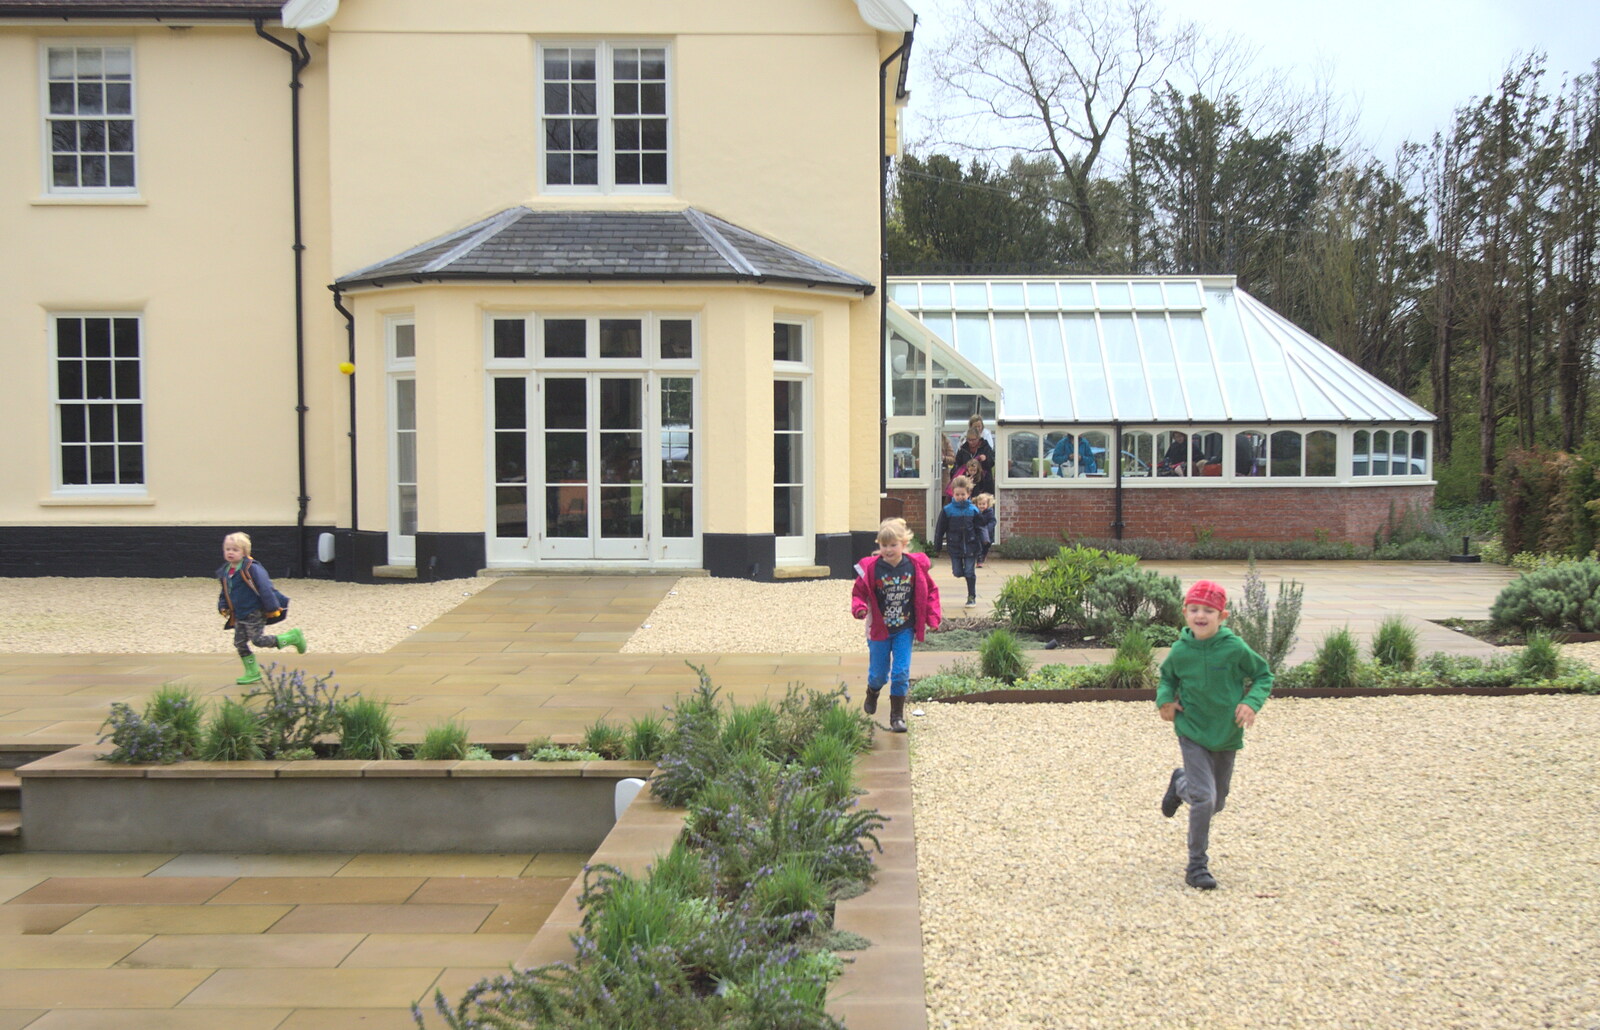 The children burst out of the conservatory from Harry's Pirate Party, The Oaksmere, Brome, Suffolk - 16th April 2016